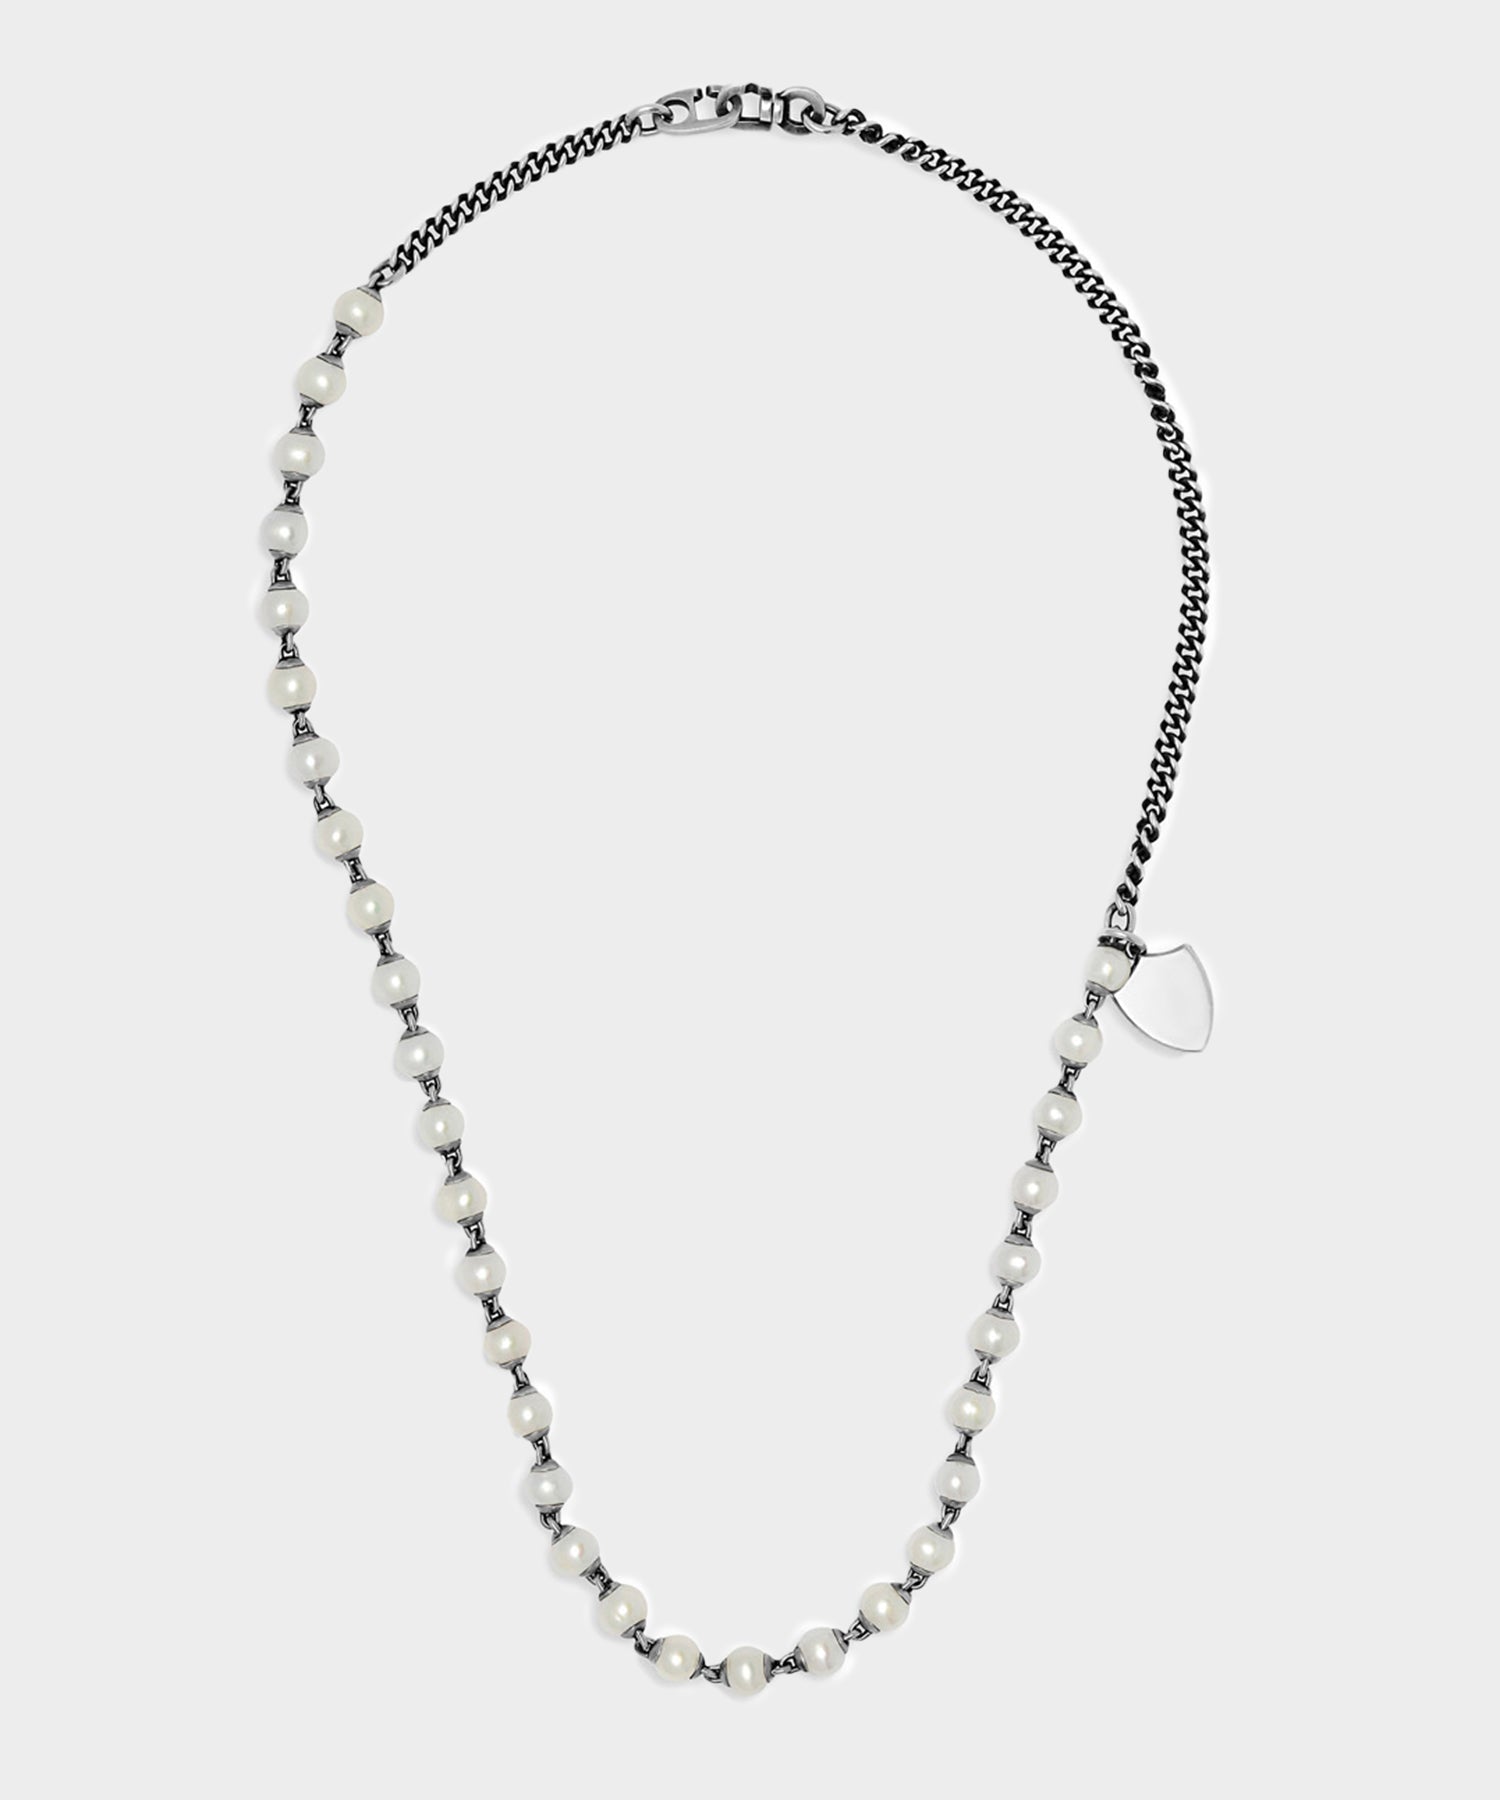 Mondi Necklace in Silver with White Pearls